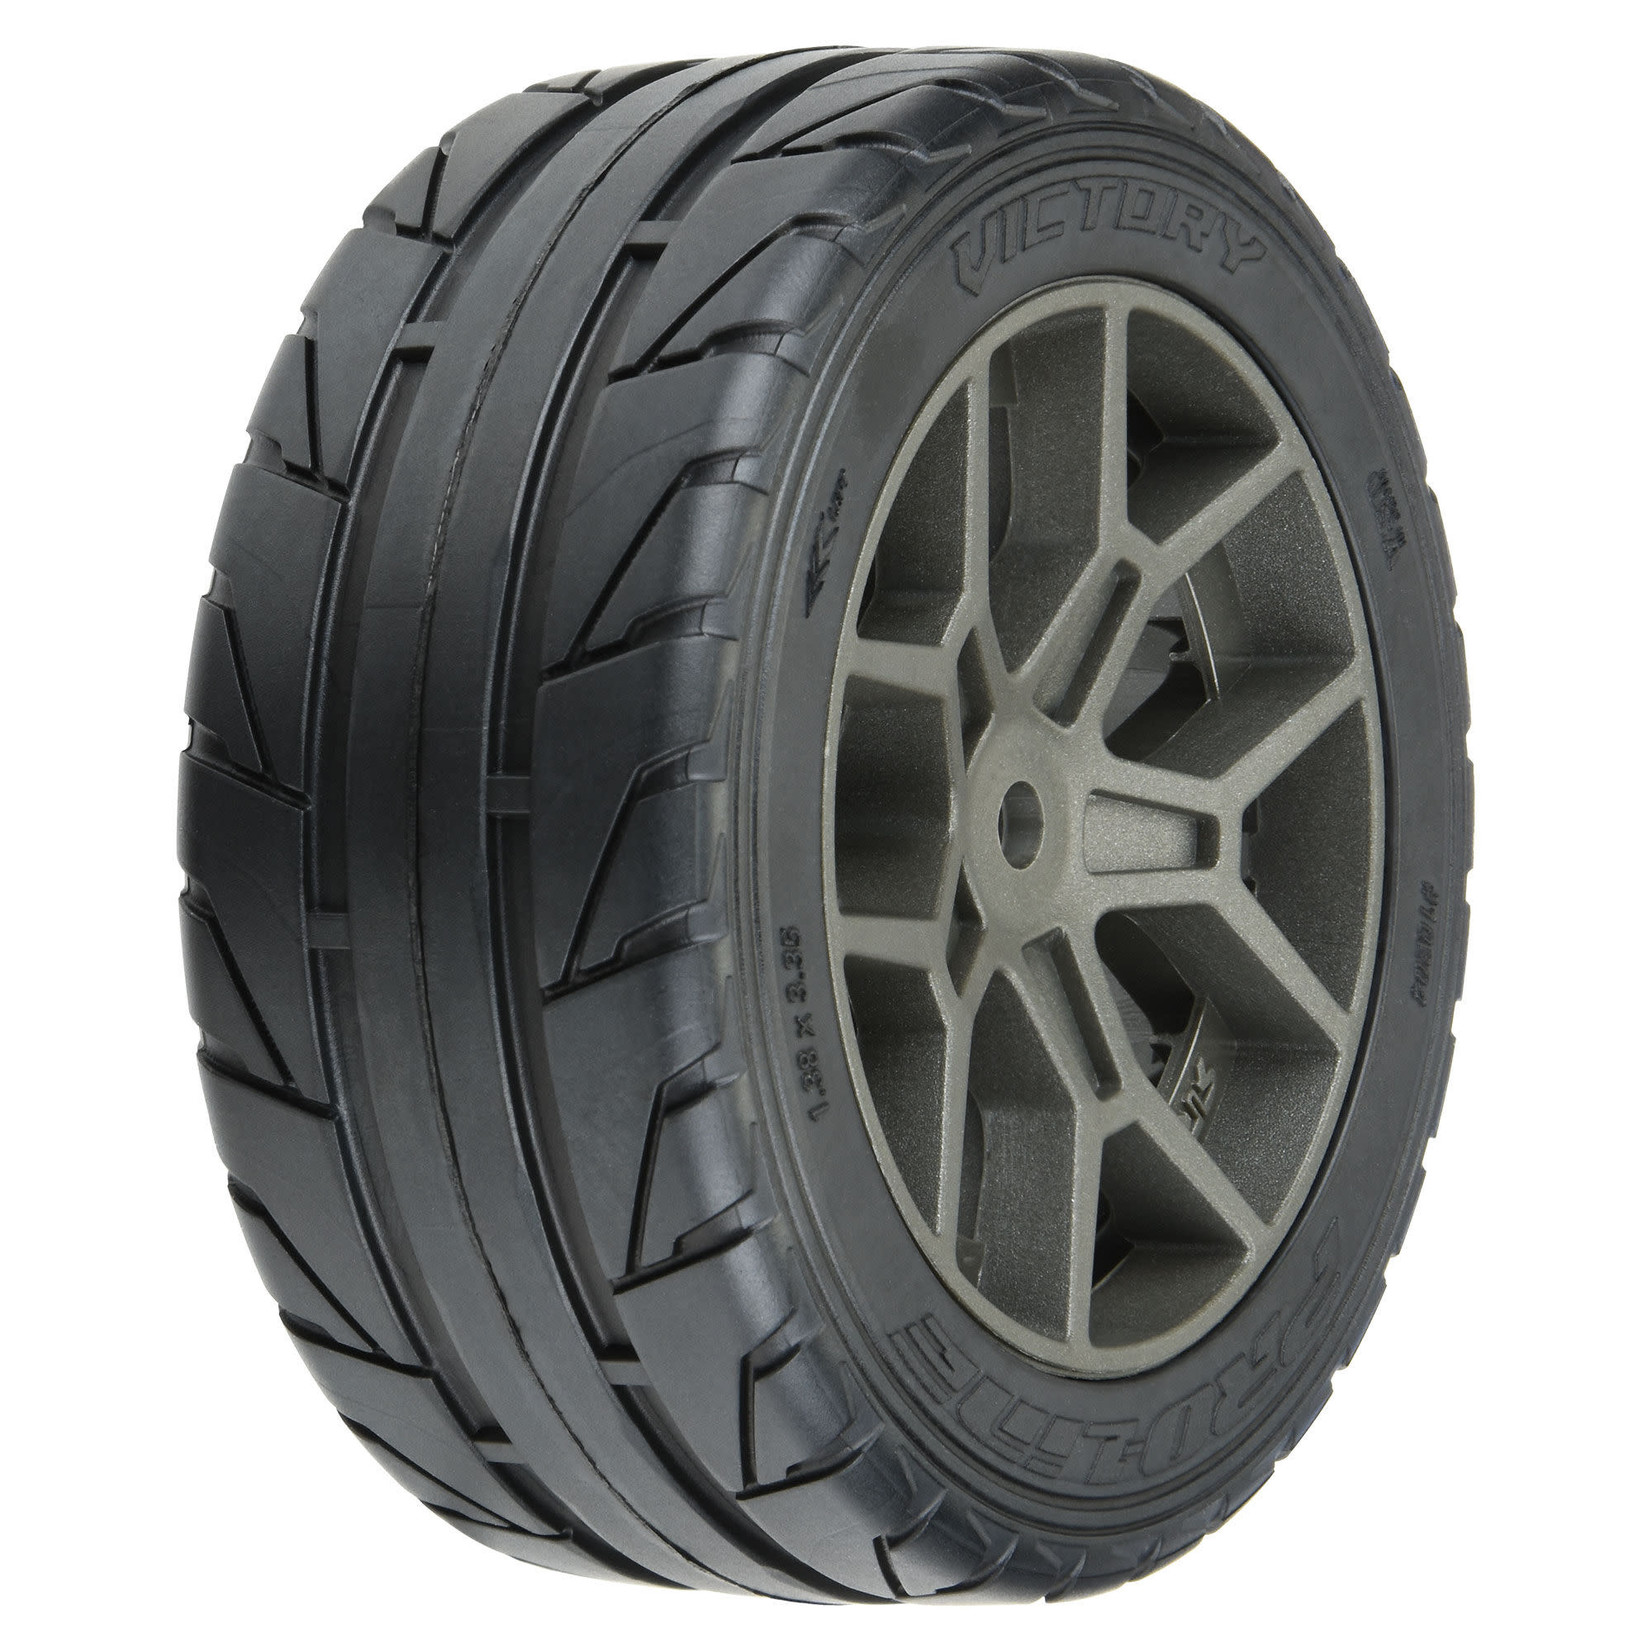 Pro-Line Pro-Line Vector 35/85 2.4" Belted Pre-Mounted On-Road Tires (Grey) (2) (S3) w/14mm Hex #10204-10